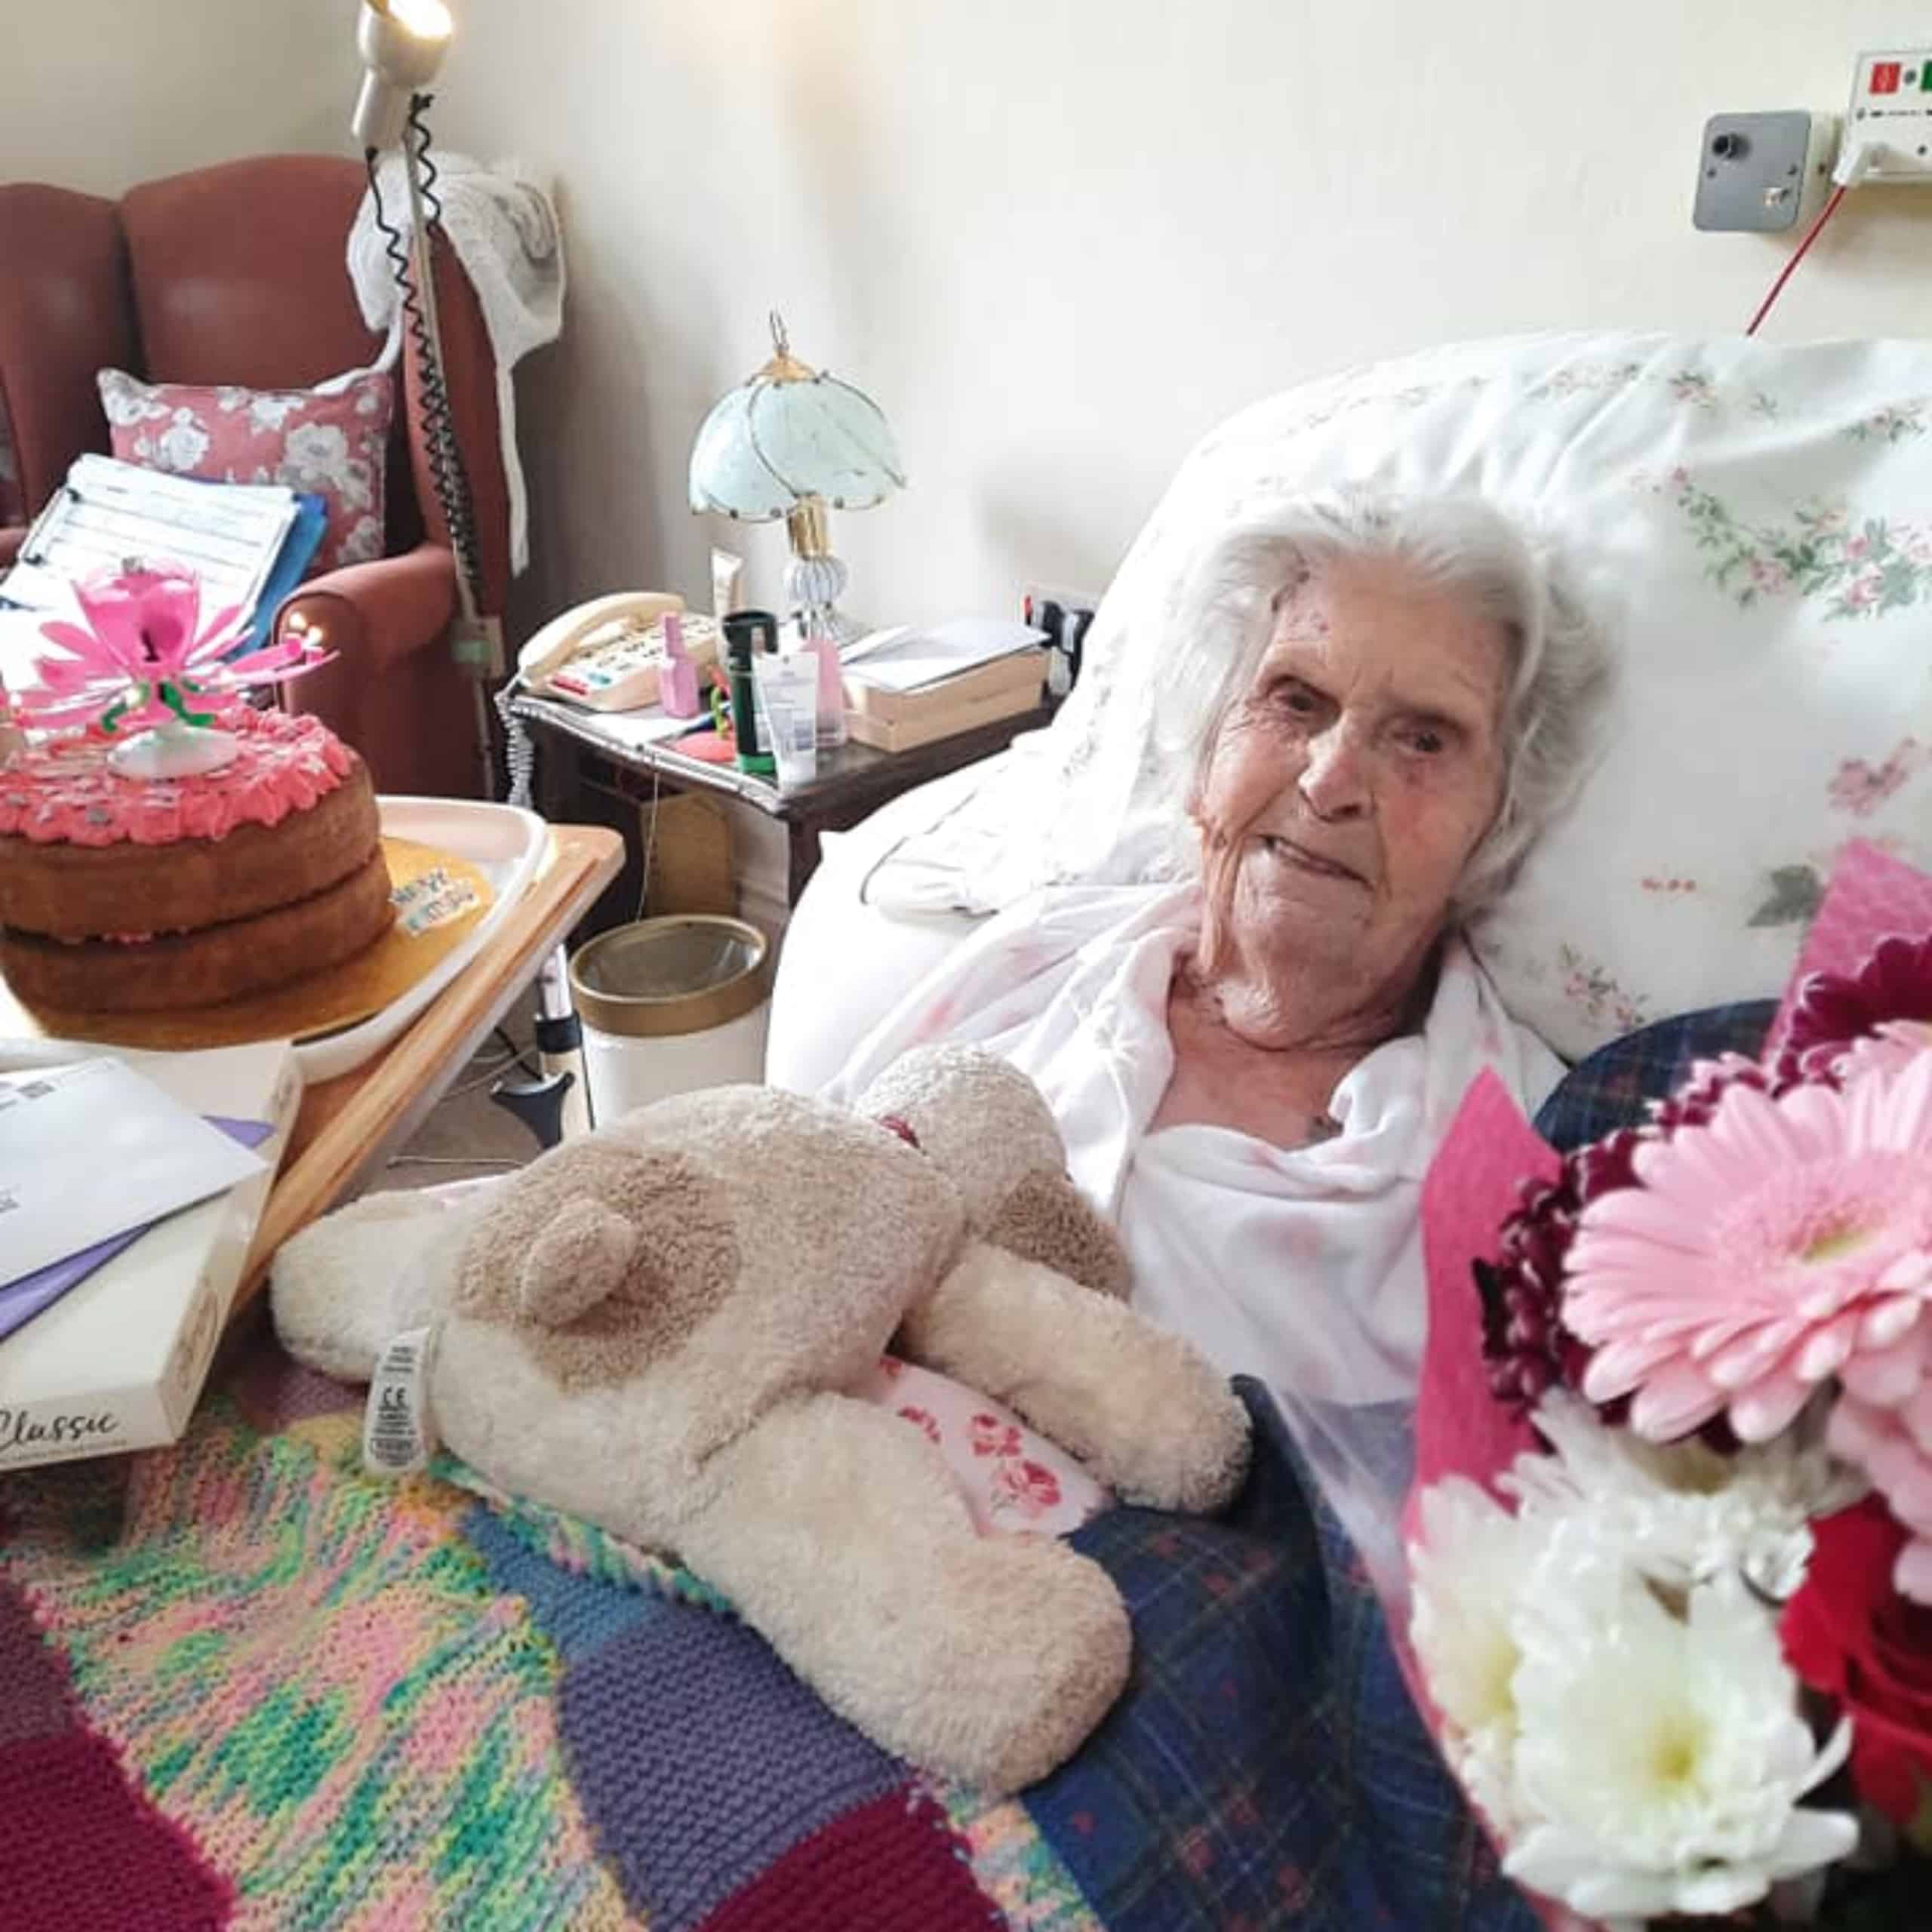 Wren House Care Home resident Barbara Elliot with her birthday cake and flowers.